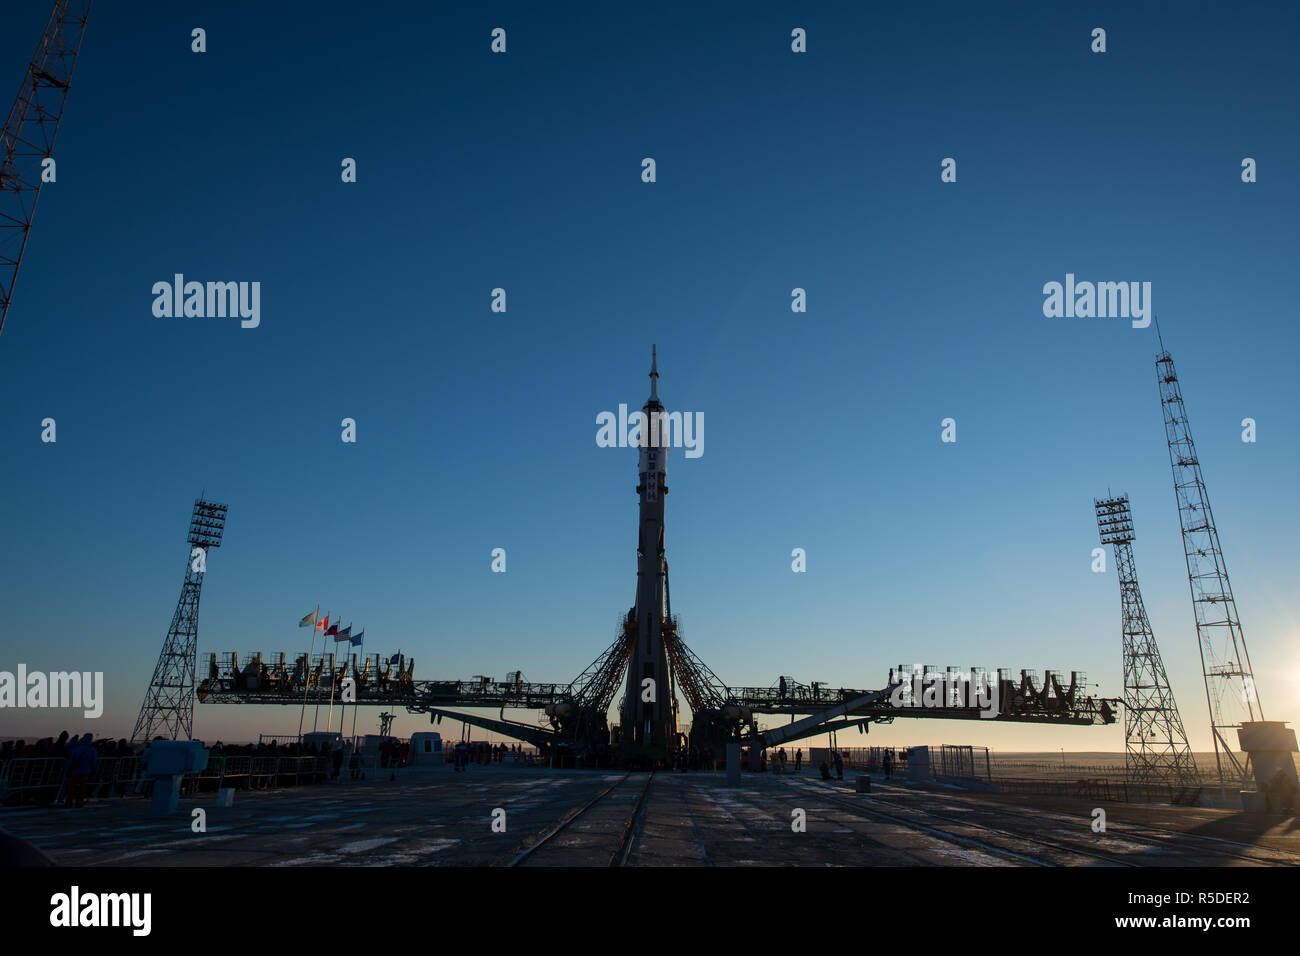 Baikonur, Kazakhstan, 1st December 2018. The Soyuz booster rocket and MS-11 spacecraft is upright on the launch pad as the gantry arms begin to close early morning at the Baikonur Cosmodrome December 1, 2018 in Baikonur, Kazakhstan. The rocket will carry Expedition 58 crew members Russian Oleg Kononenko of Roscosmos, American Anne McClain and Canadian David Saint-Jacques to the International Space Station on December 3rd. Credit: Planetpix/Alamy Live News Stock Photo